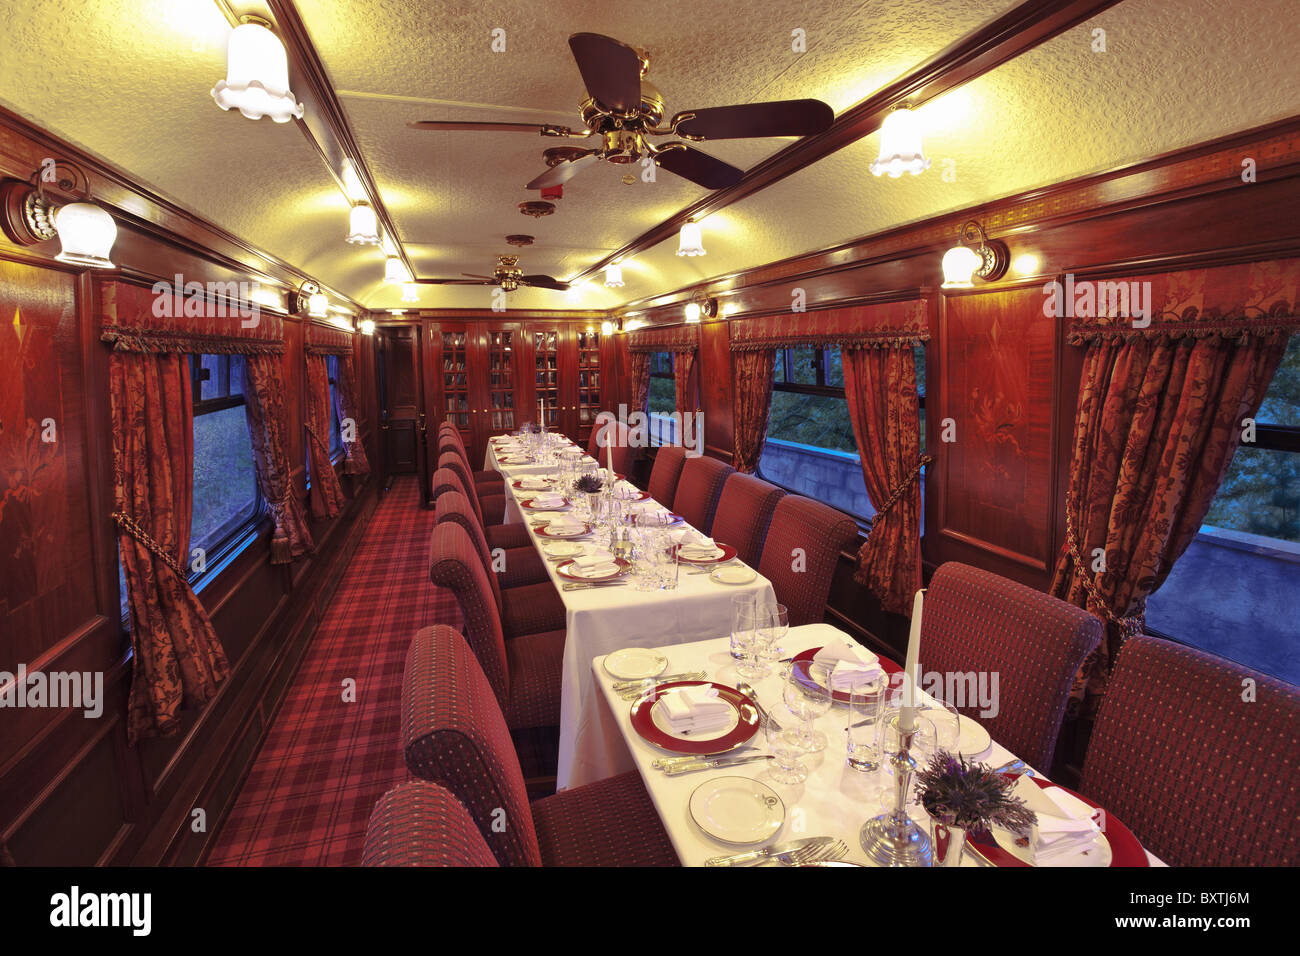 The Royal Scotsman Train. Interior view of dinning car. Stock Photo